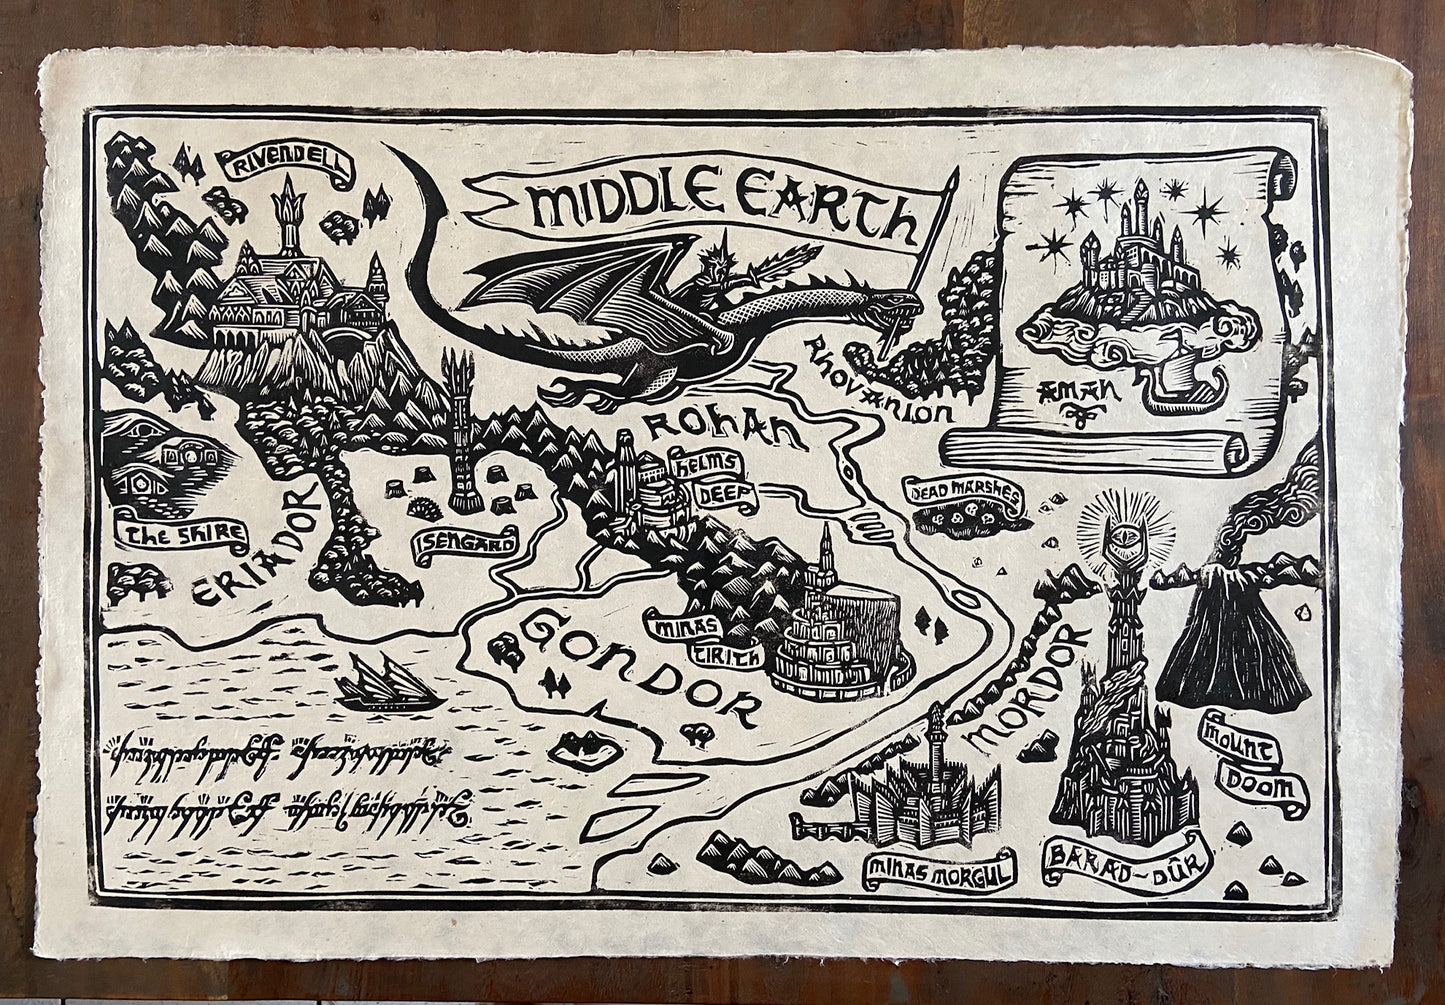 Brian Reedy "Middle Earth Map"